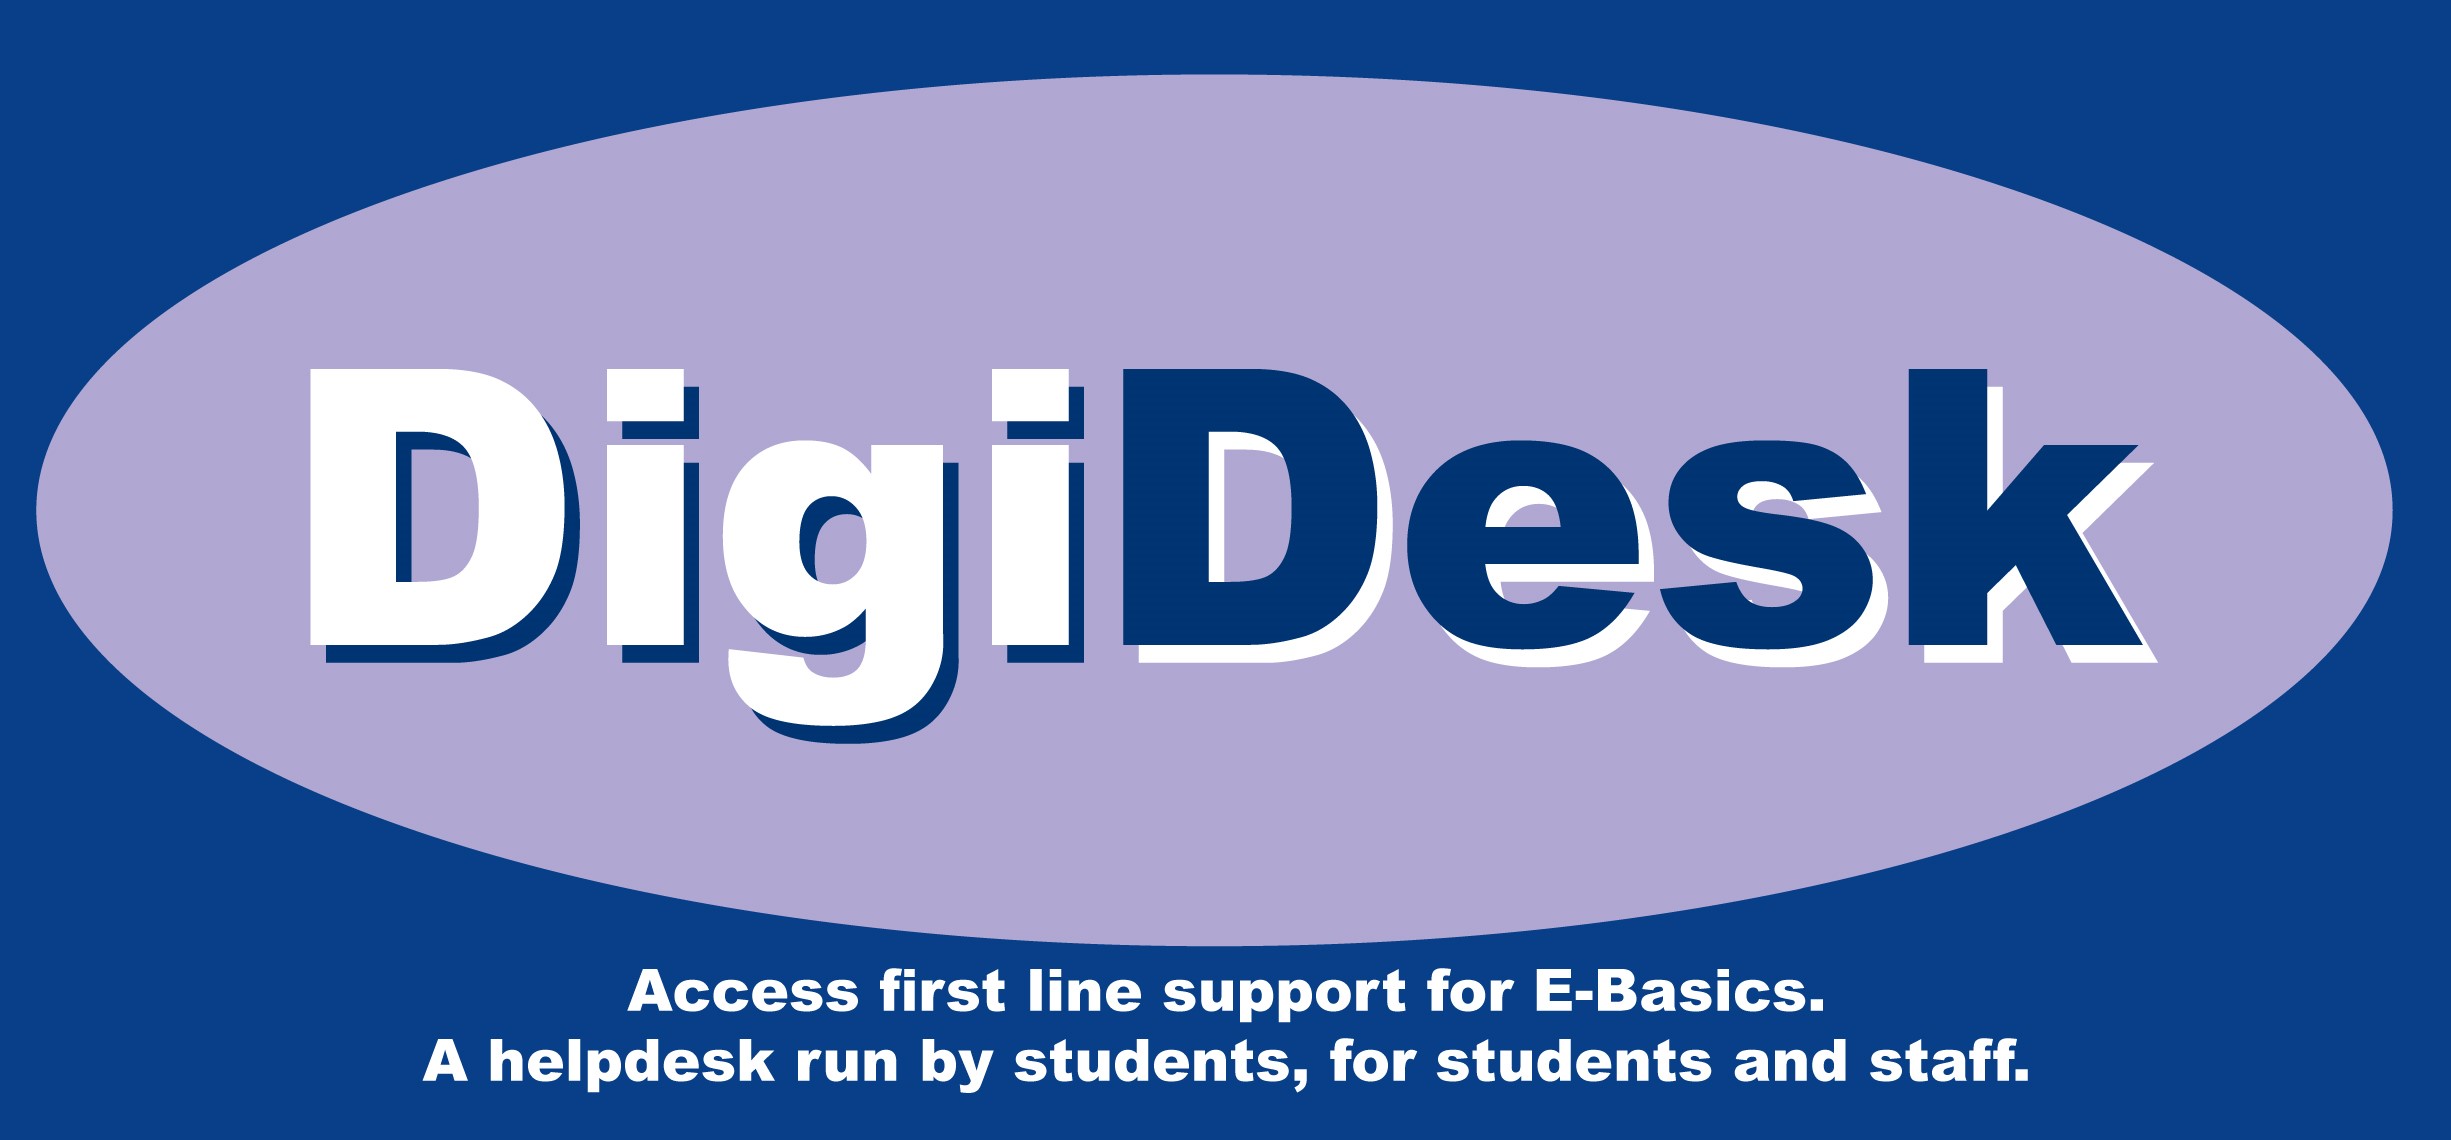 Digidesk logo with text